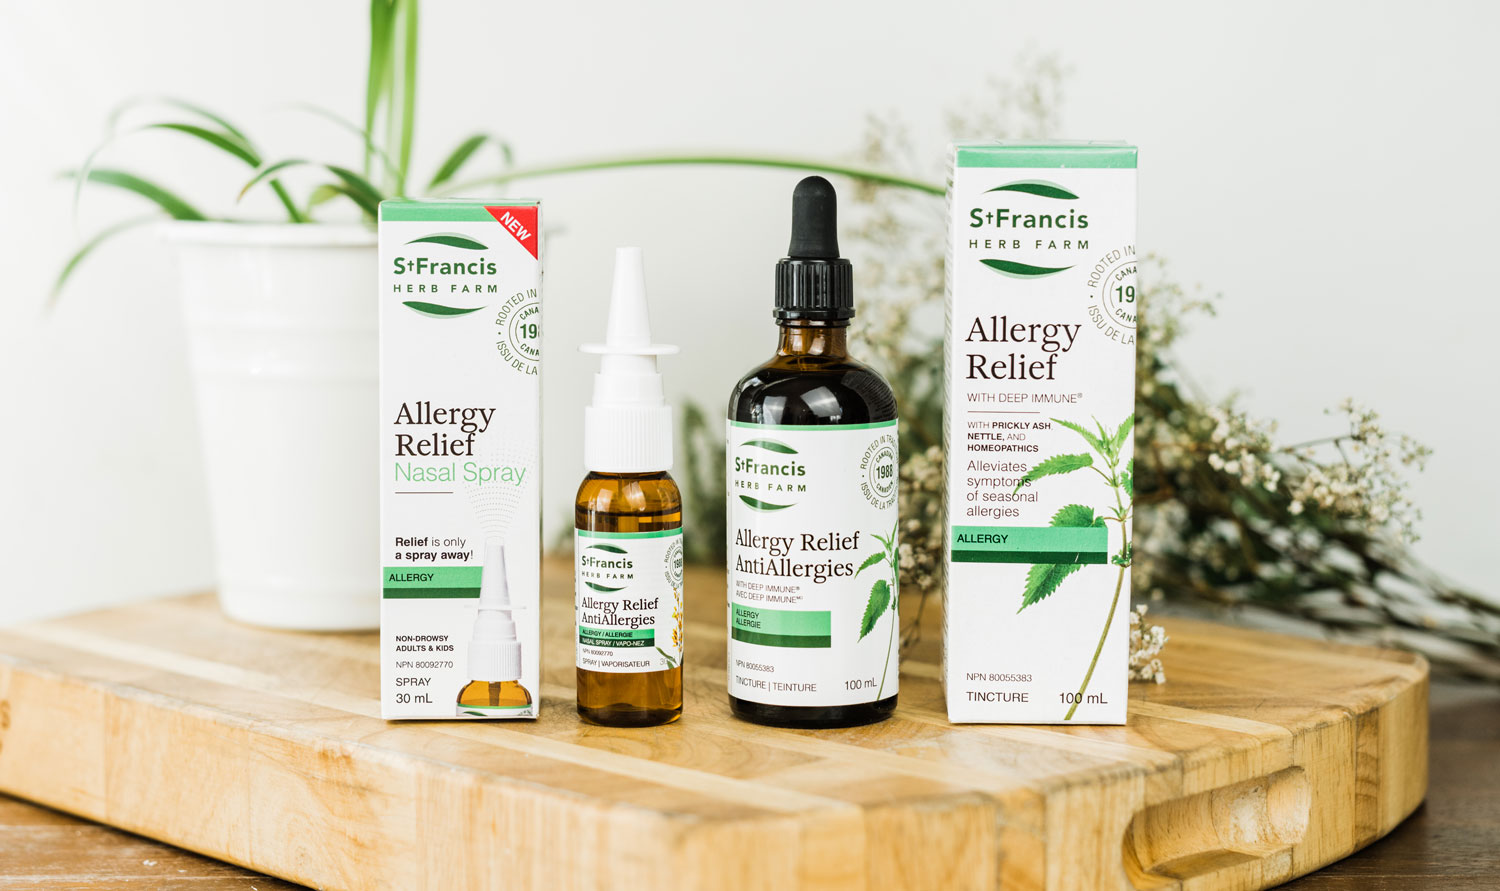 Allergy Relief with Deep Immune and Allergy Relief Nasal Spray